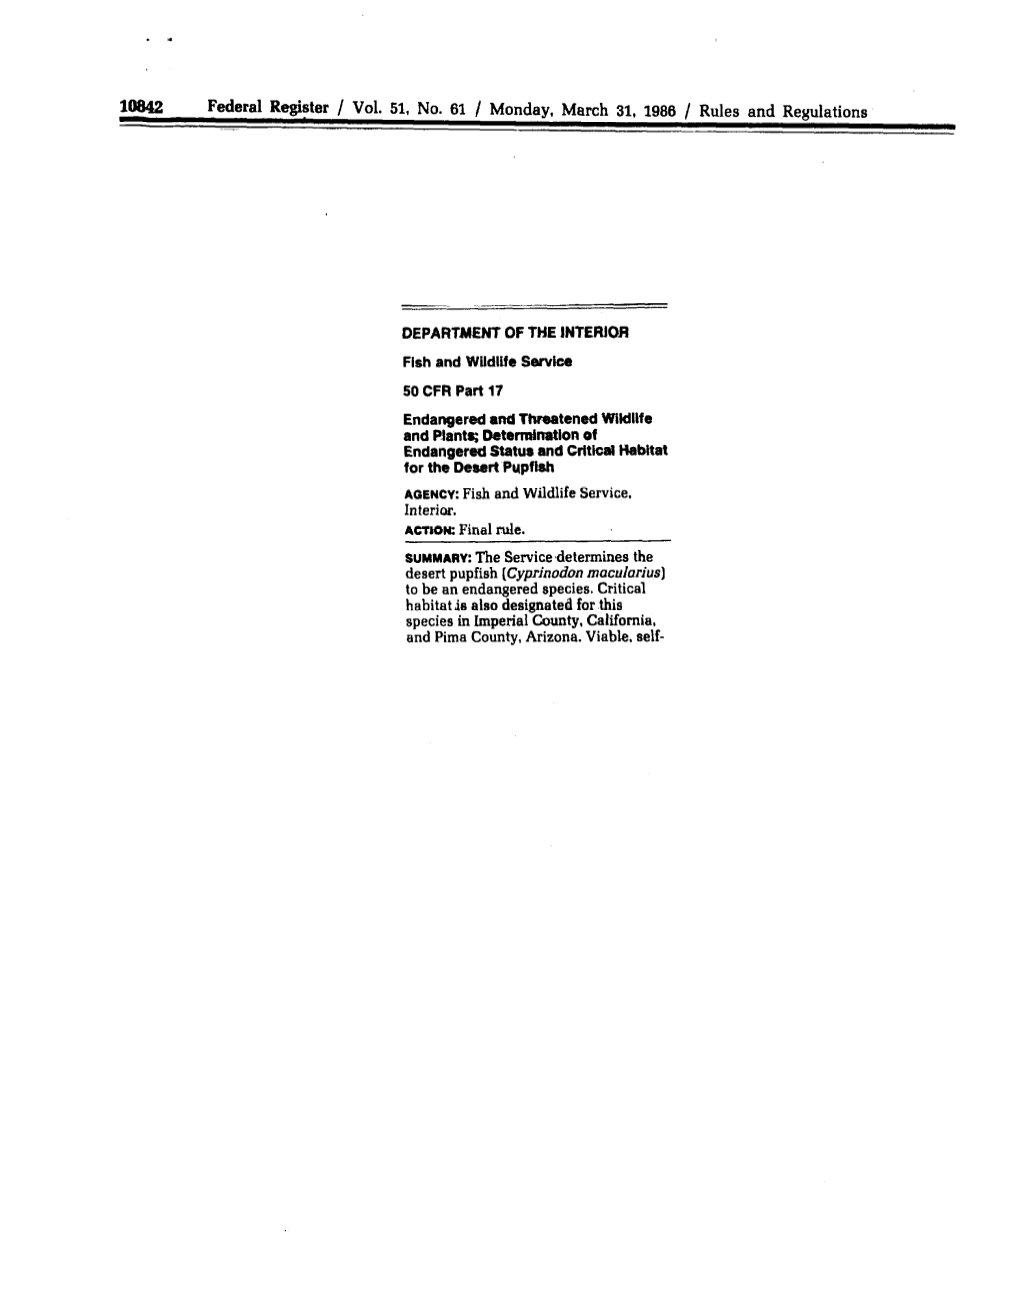 10842 Federal Fhgister / Vol. 51, No. 61 / Monday, March 31, 1988 / Rules and Regulations